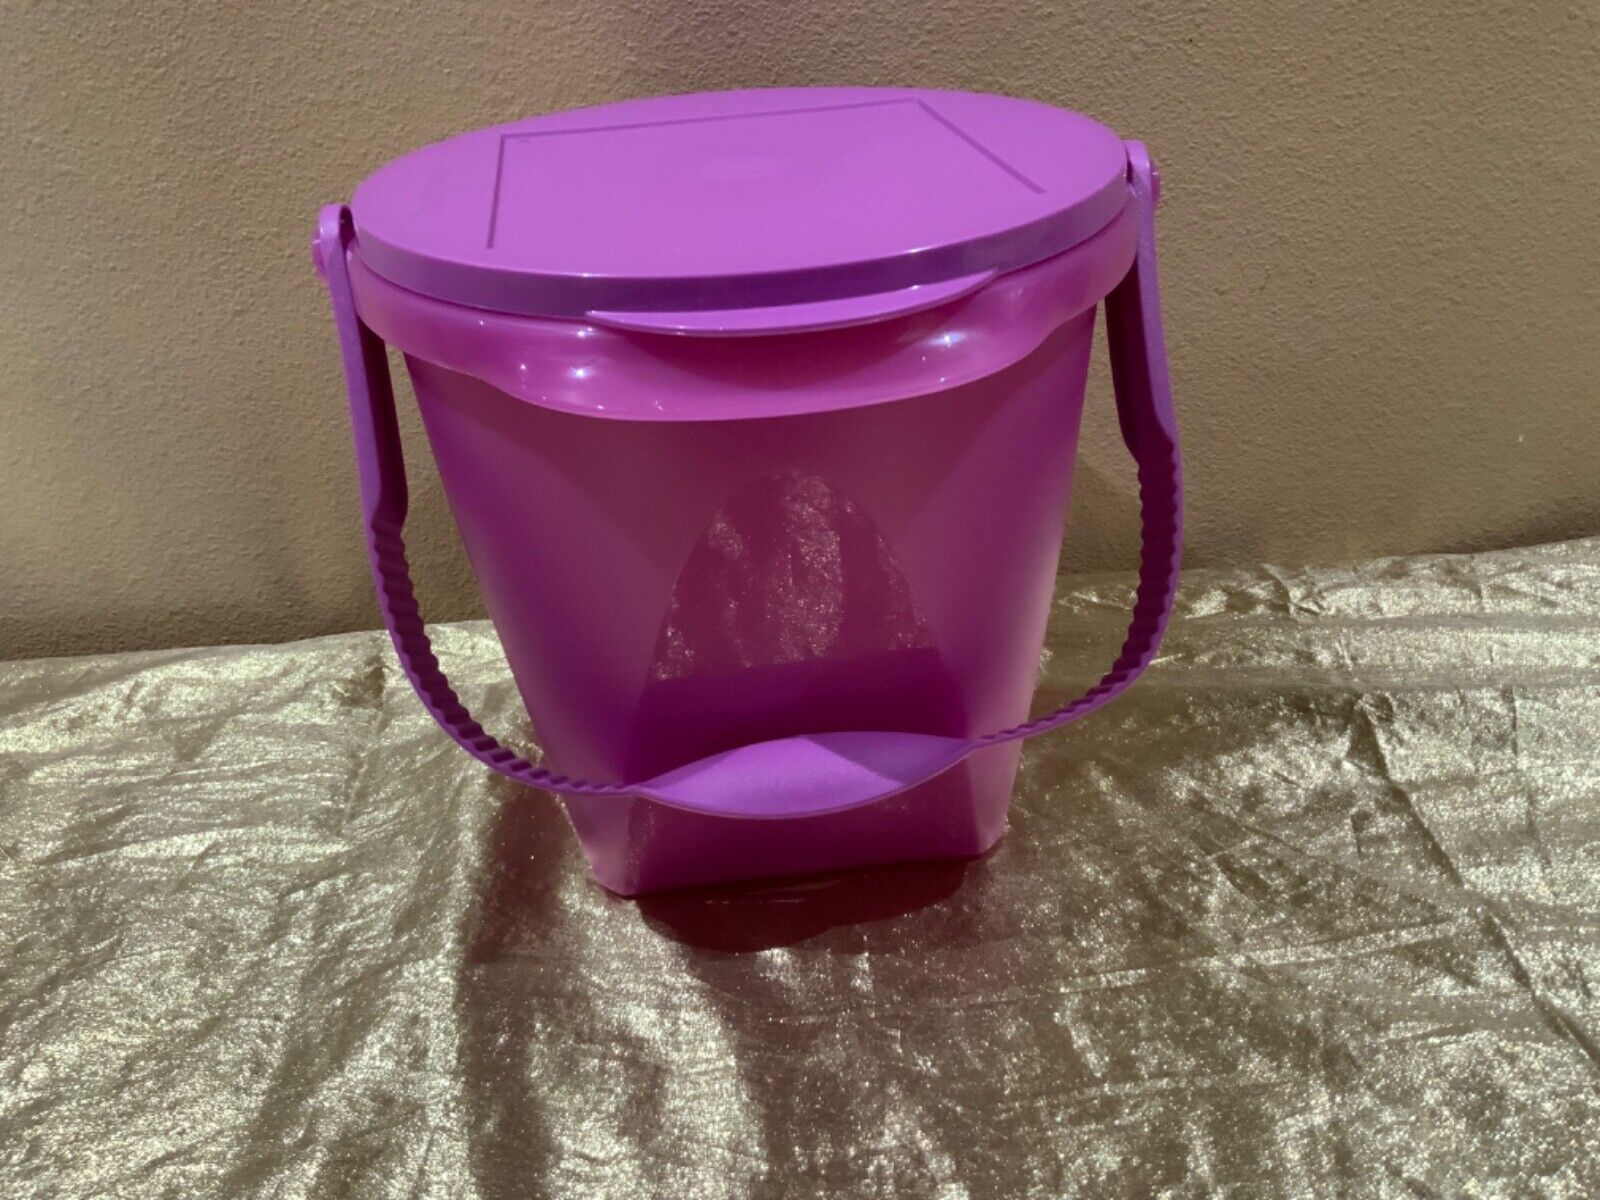 New UNIQUE Beautiful Round Tupperware Bucket/Container 5L Mulberry Color